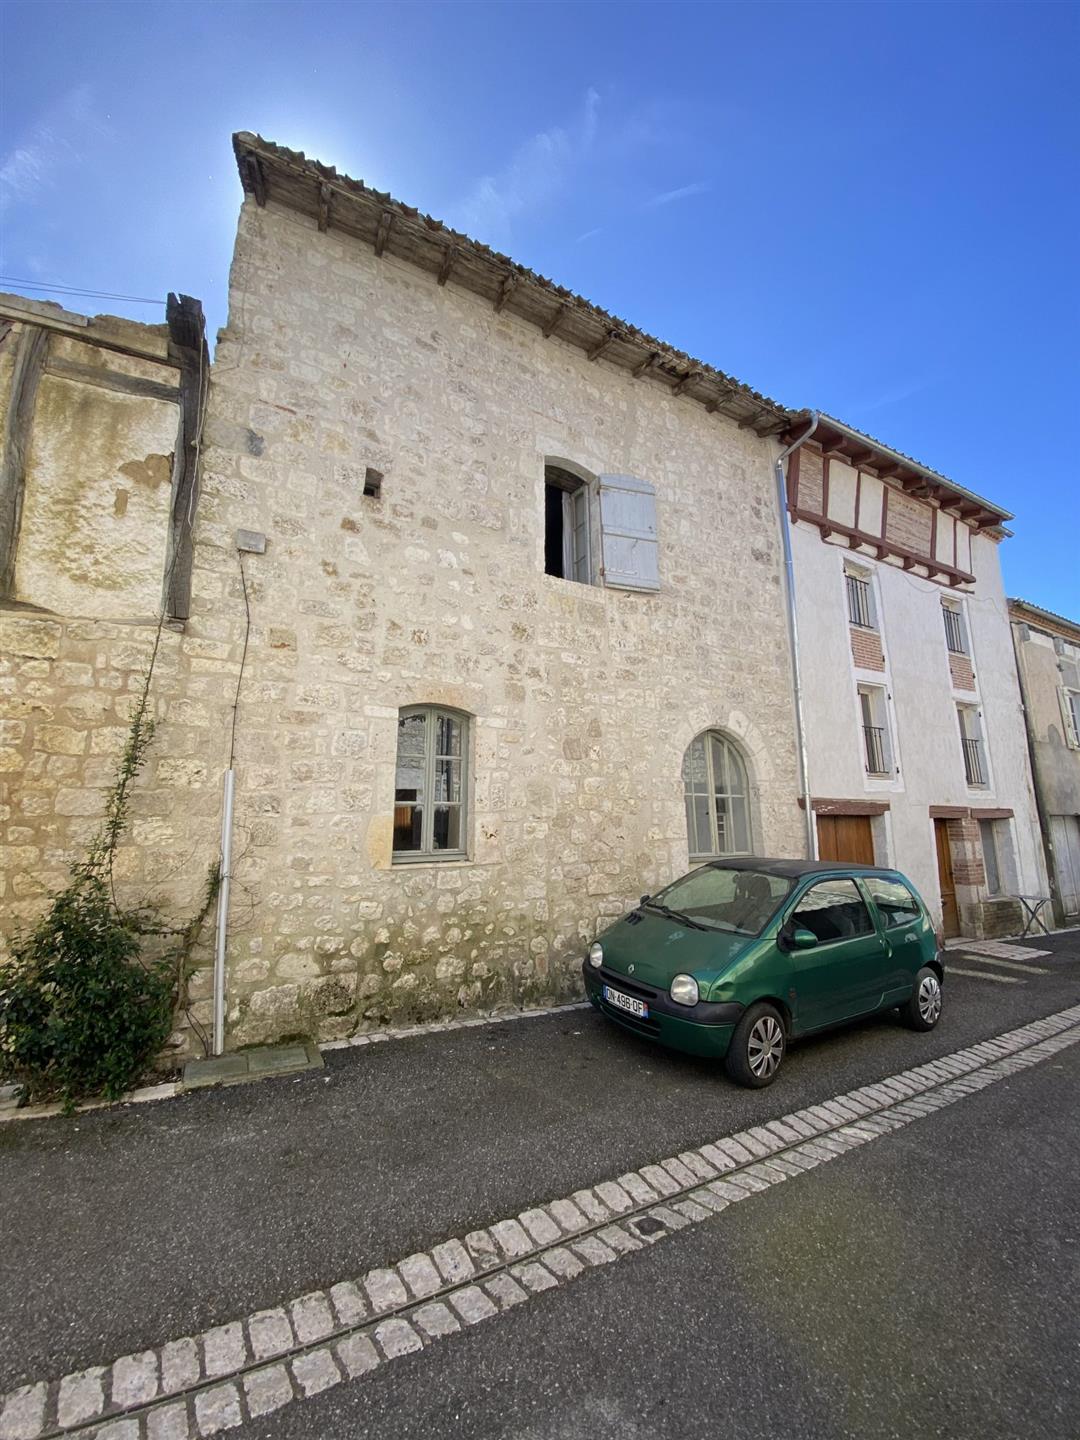  Lot Et Garonne Historic village house with 3 beds, stones throw from main square